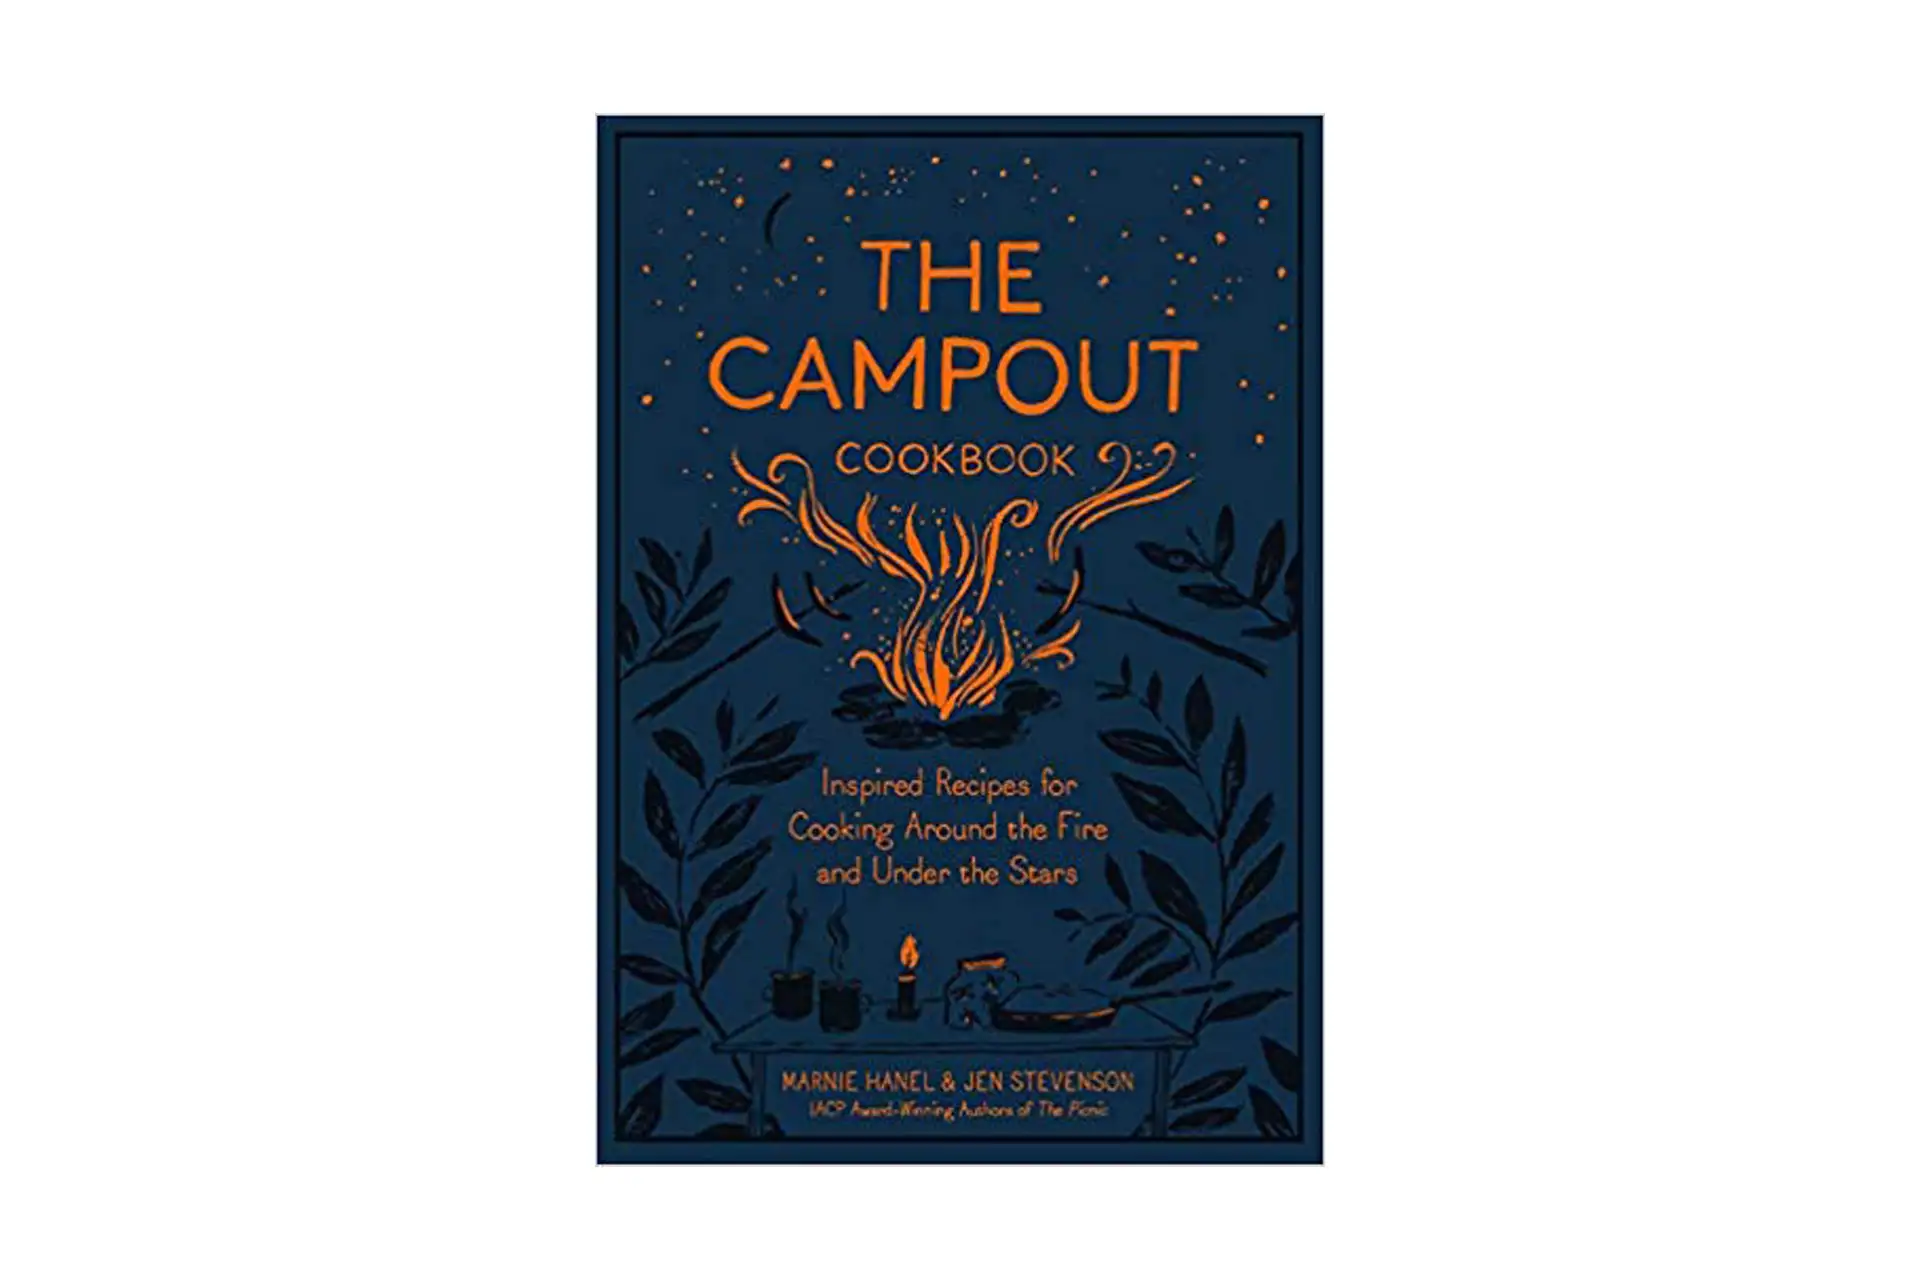 Campout Cookbook; Courtesy of Amazon